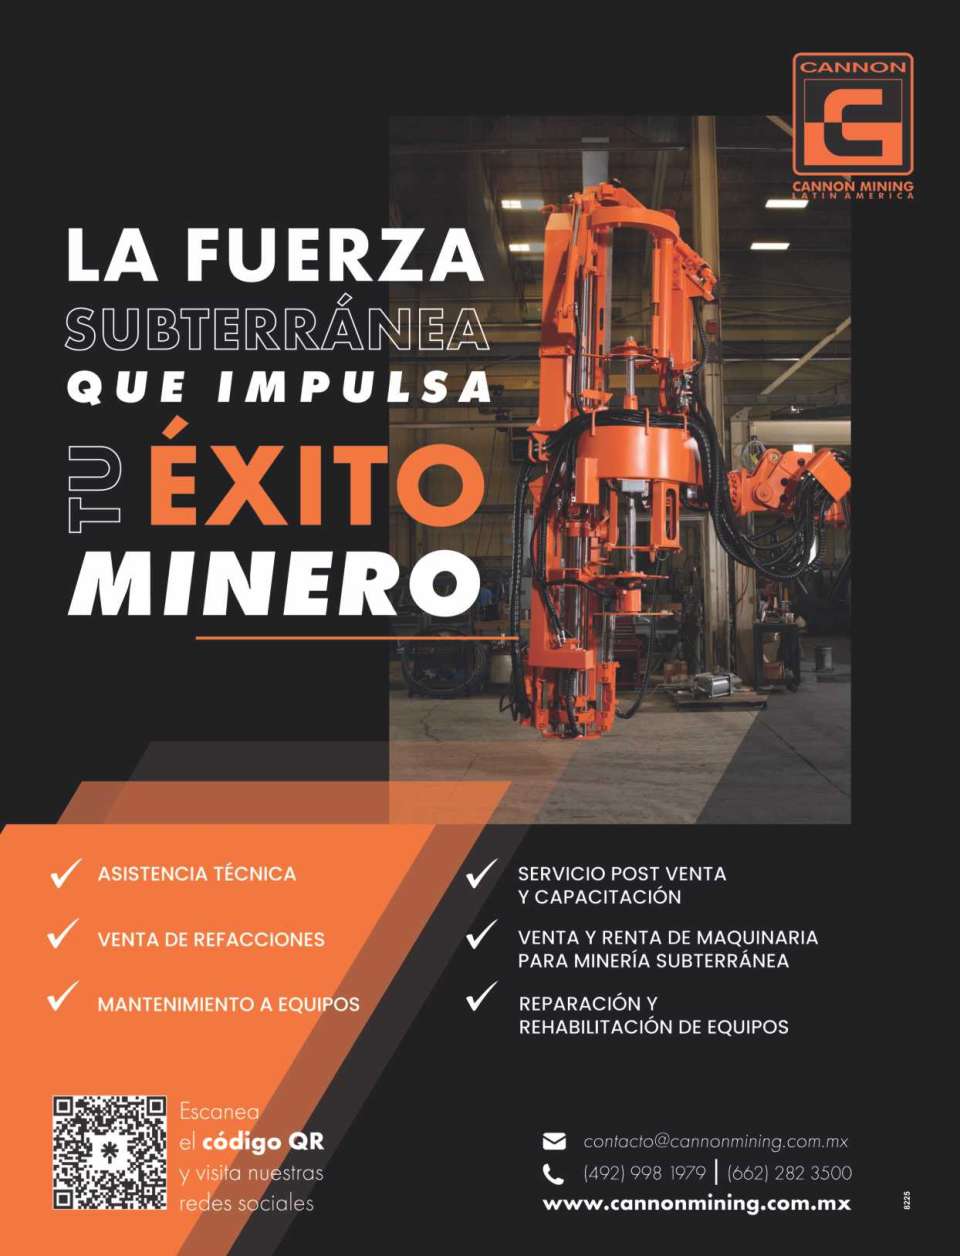 The underground force that drives your mining success. Technical assistance, sale of spare parts, equipment maintenance, service and training, machinery for underground mining, equipment repair